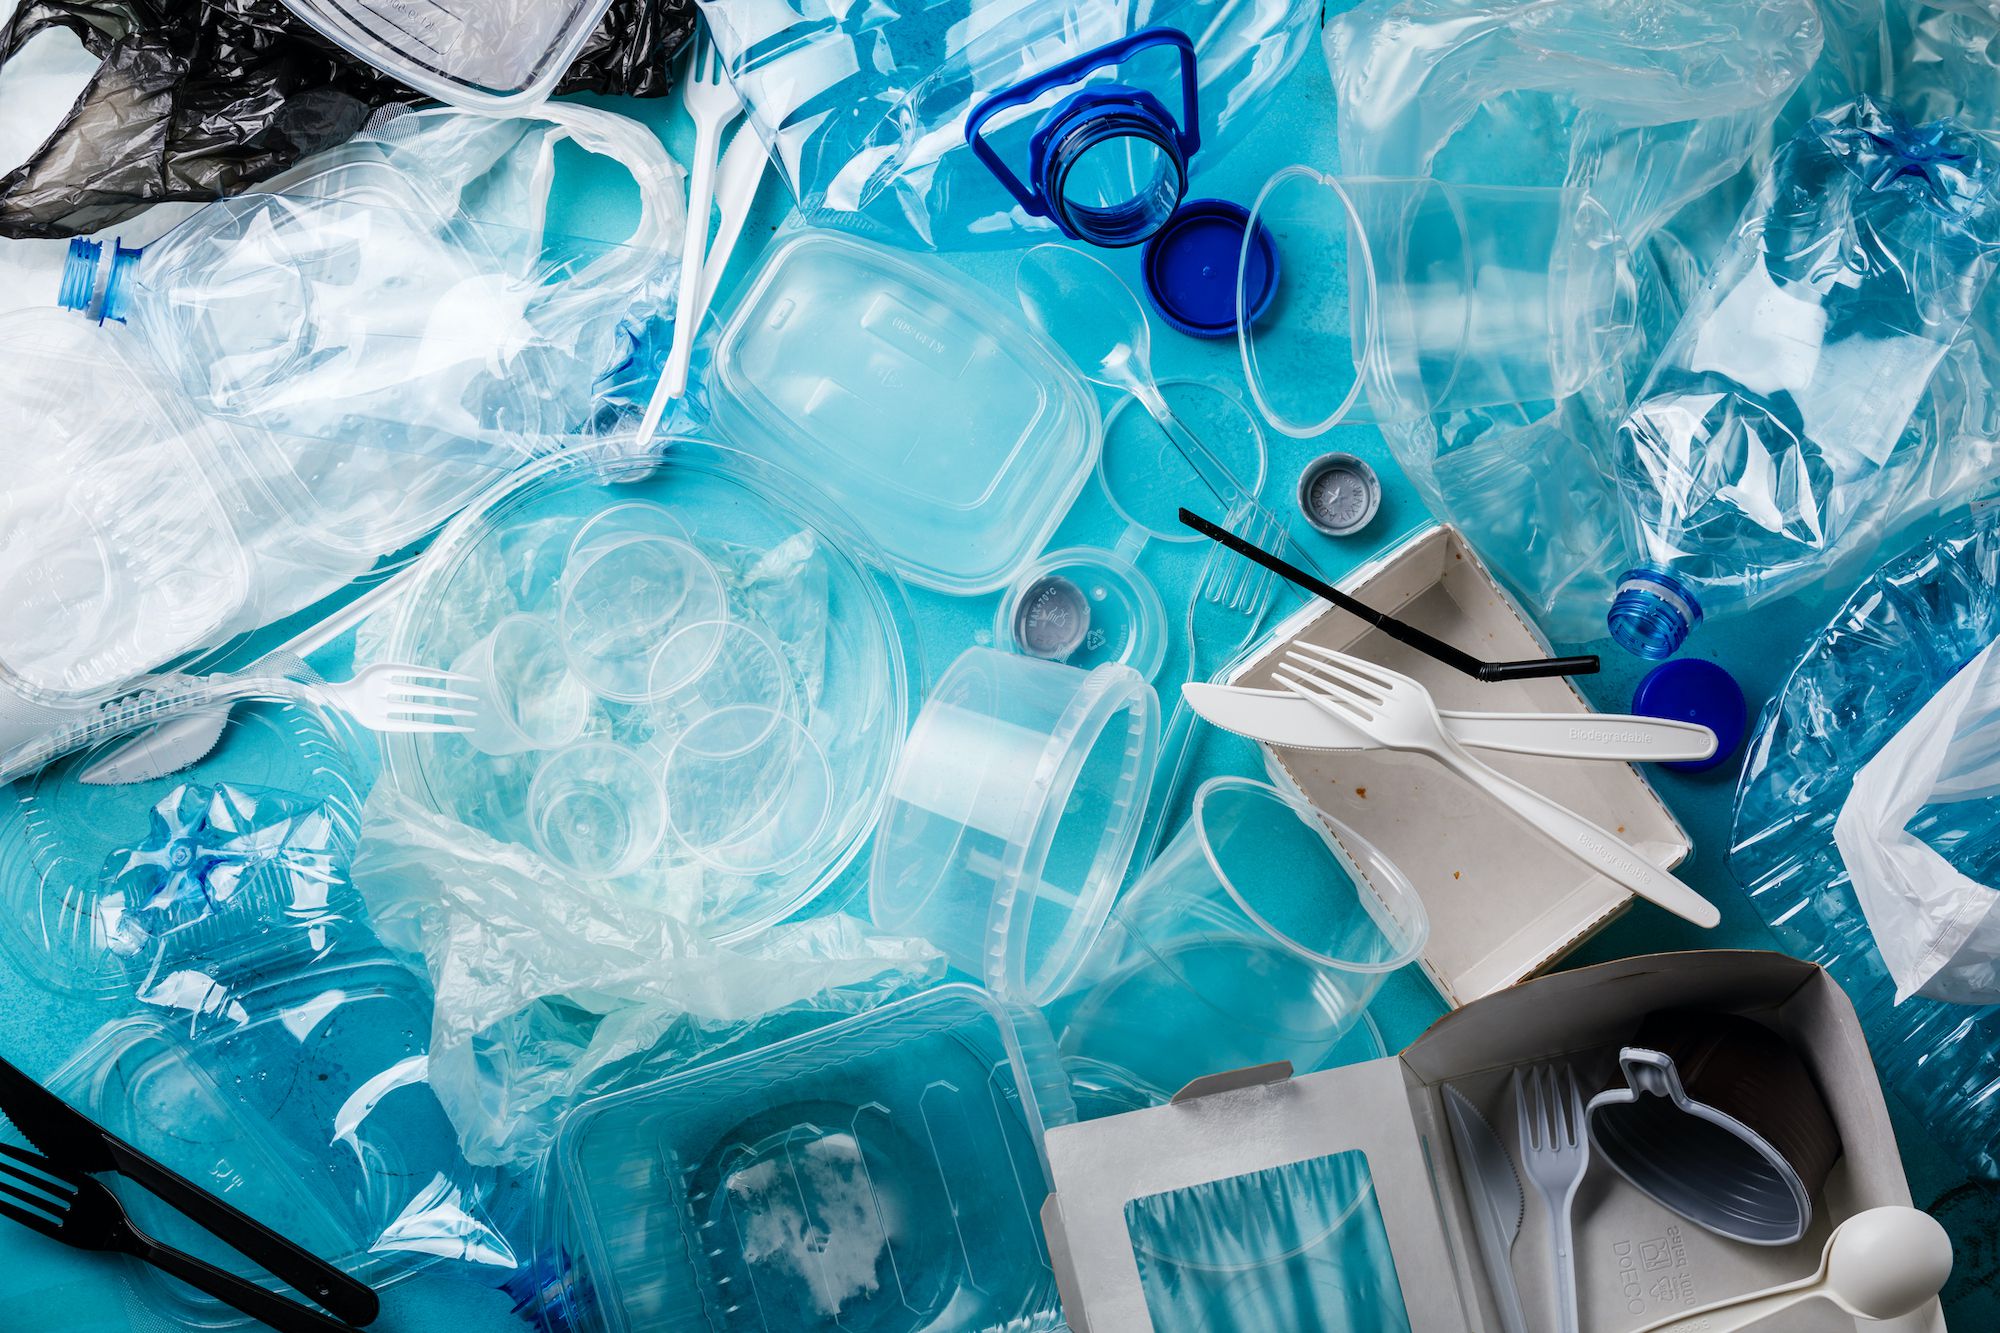 China's shift to biodegradable plastic won't solve the